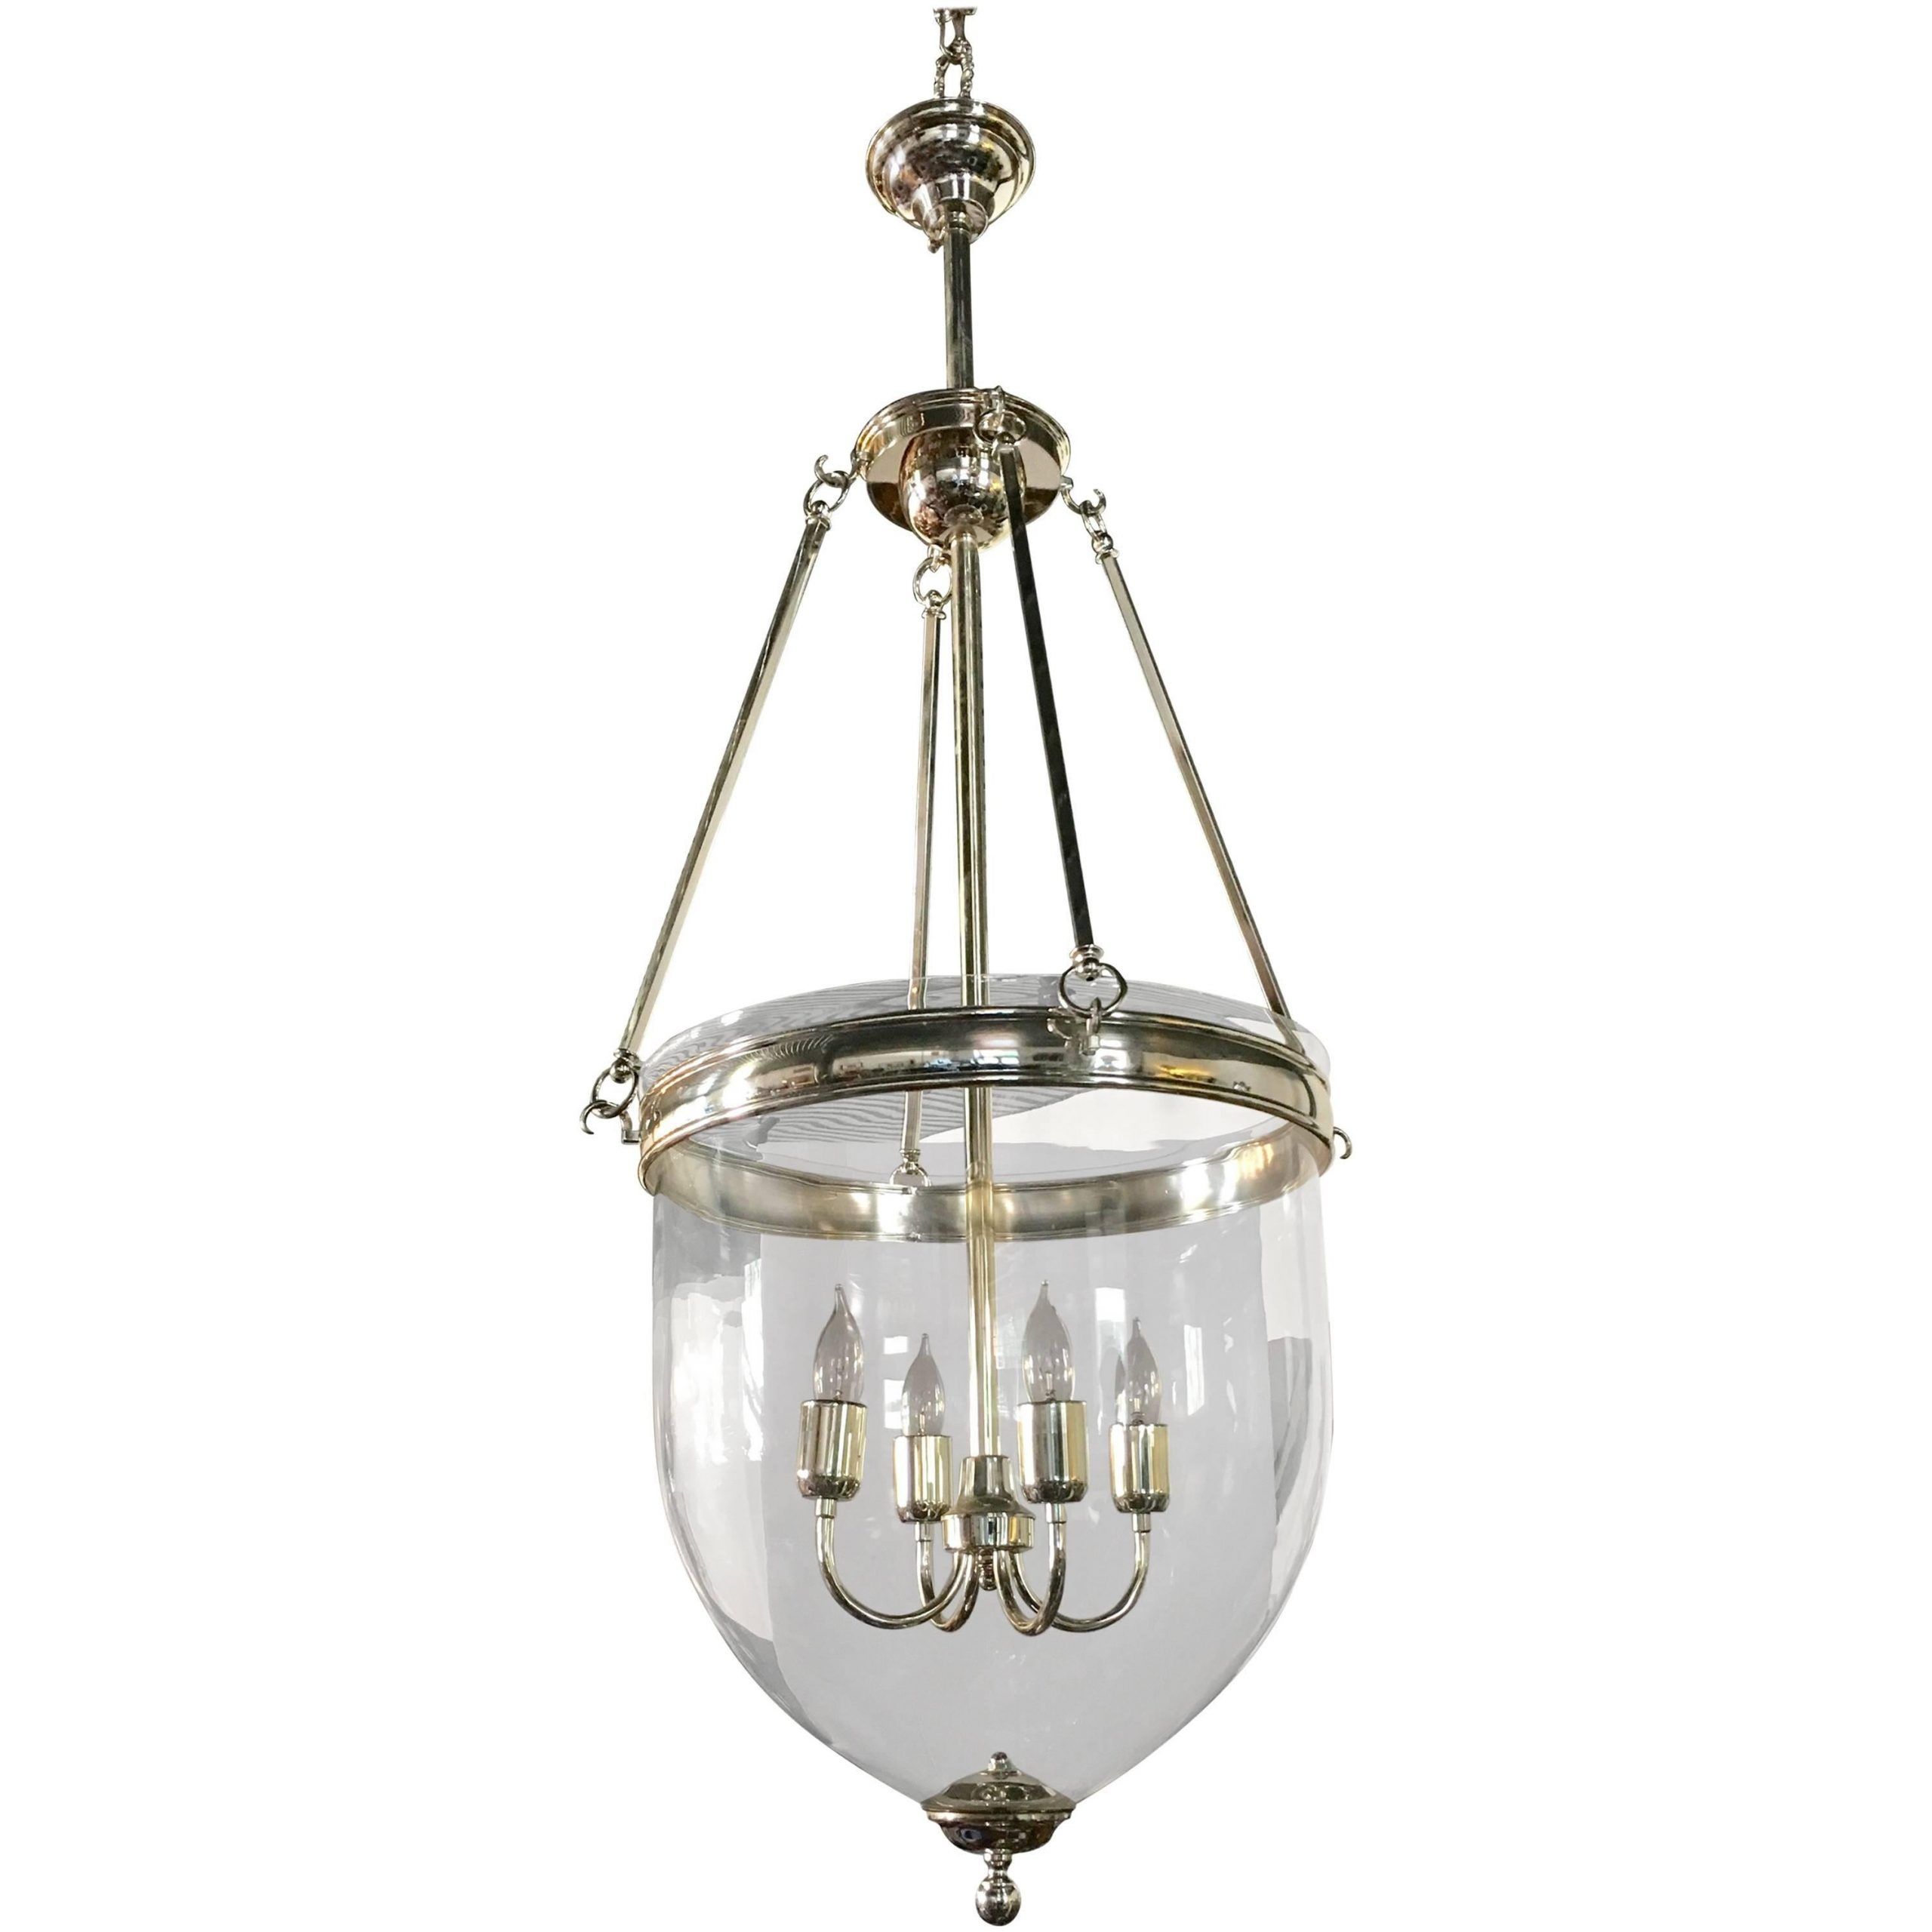 Most Recent Large Glass And Chrome Bell Jar Lantern For Sale At 1stdibs Throughout Chrome Lantern Chandeliers (View 5 of 15)